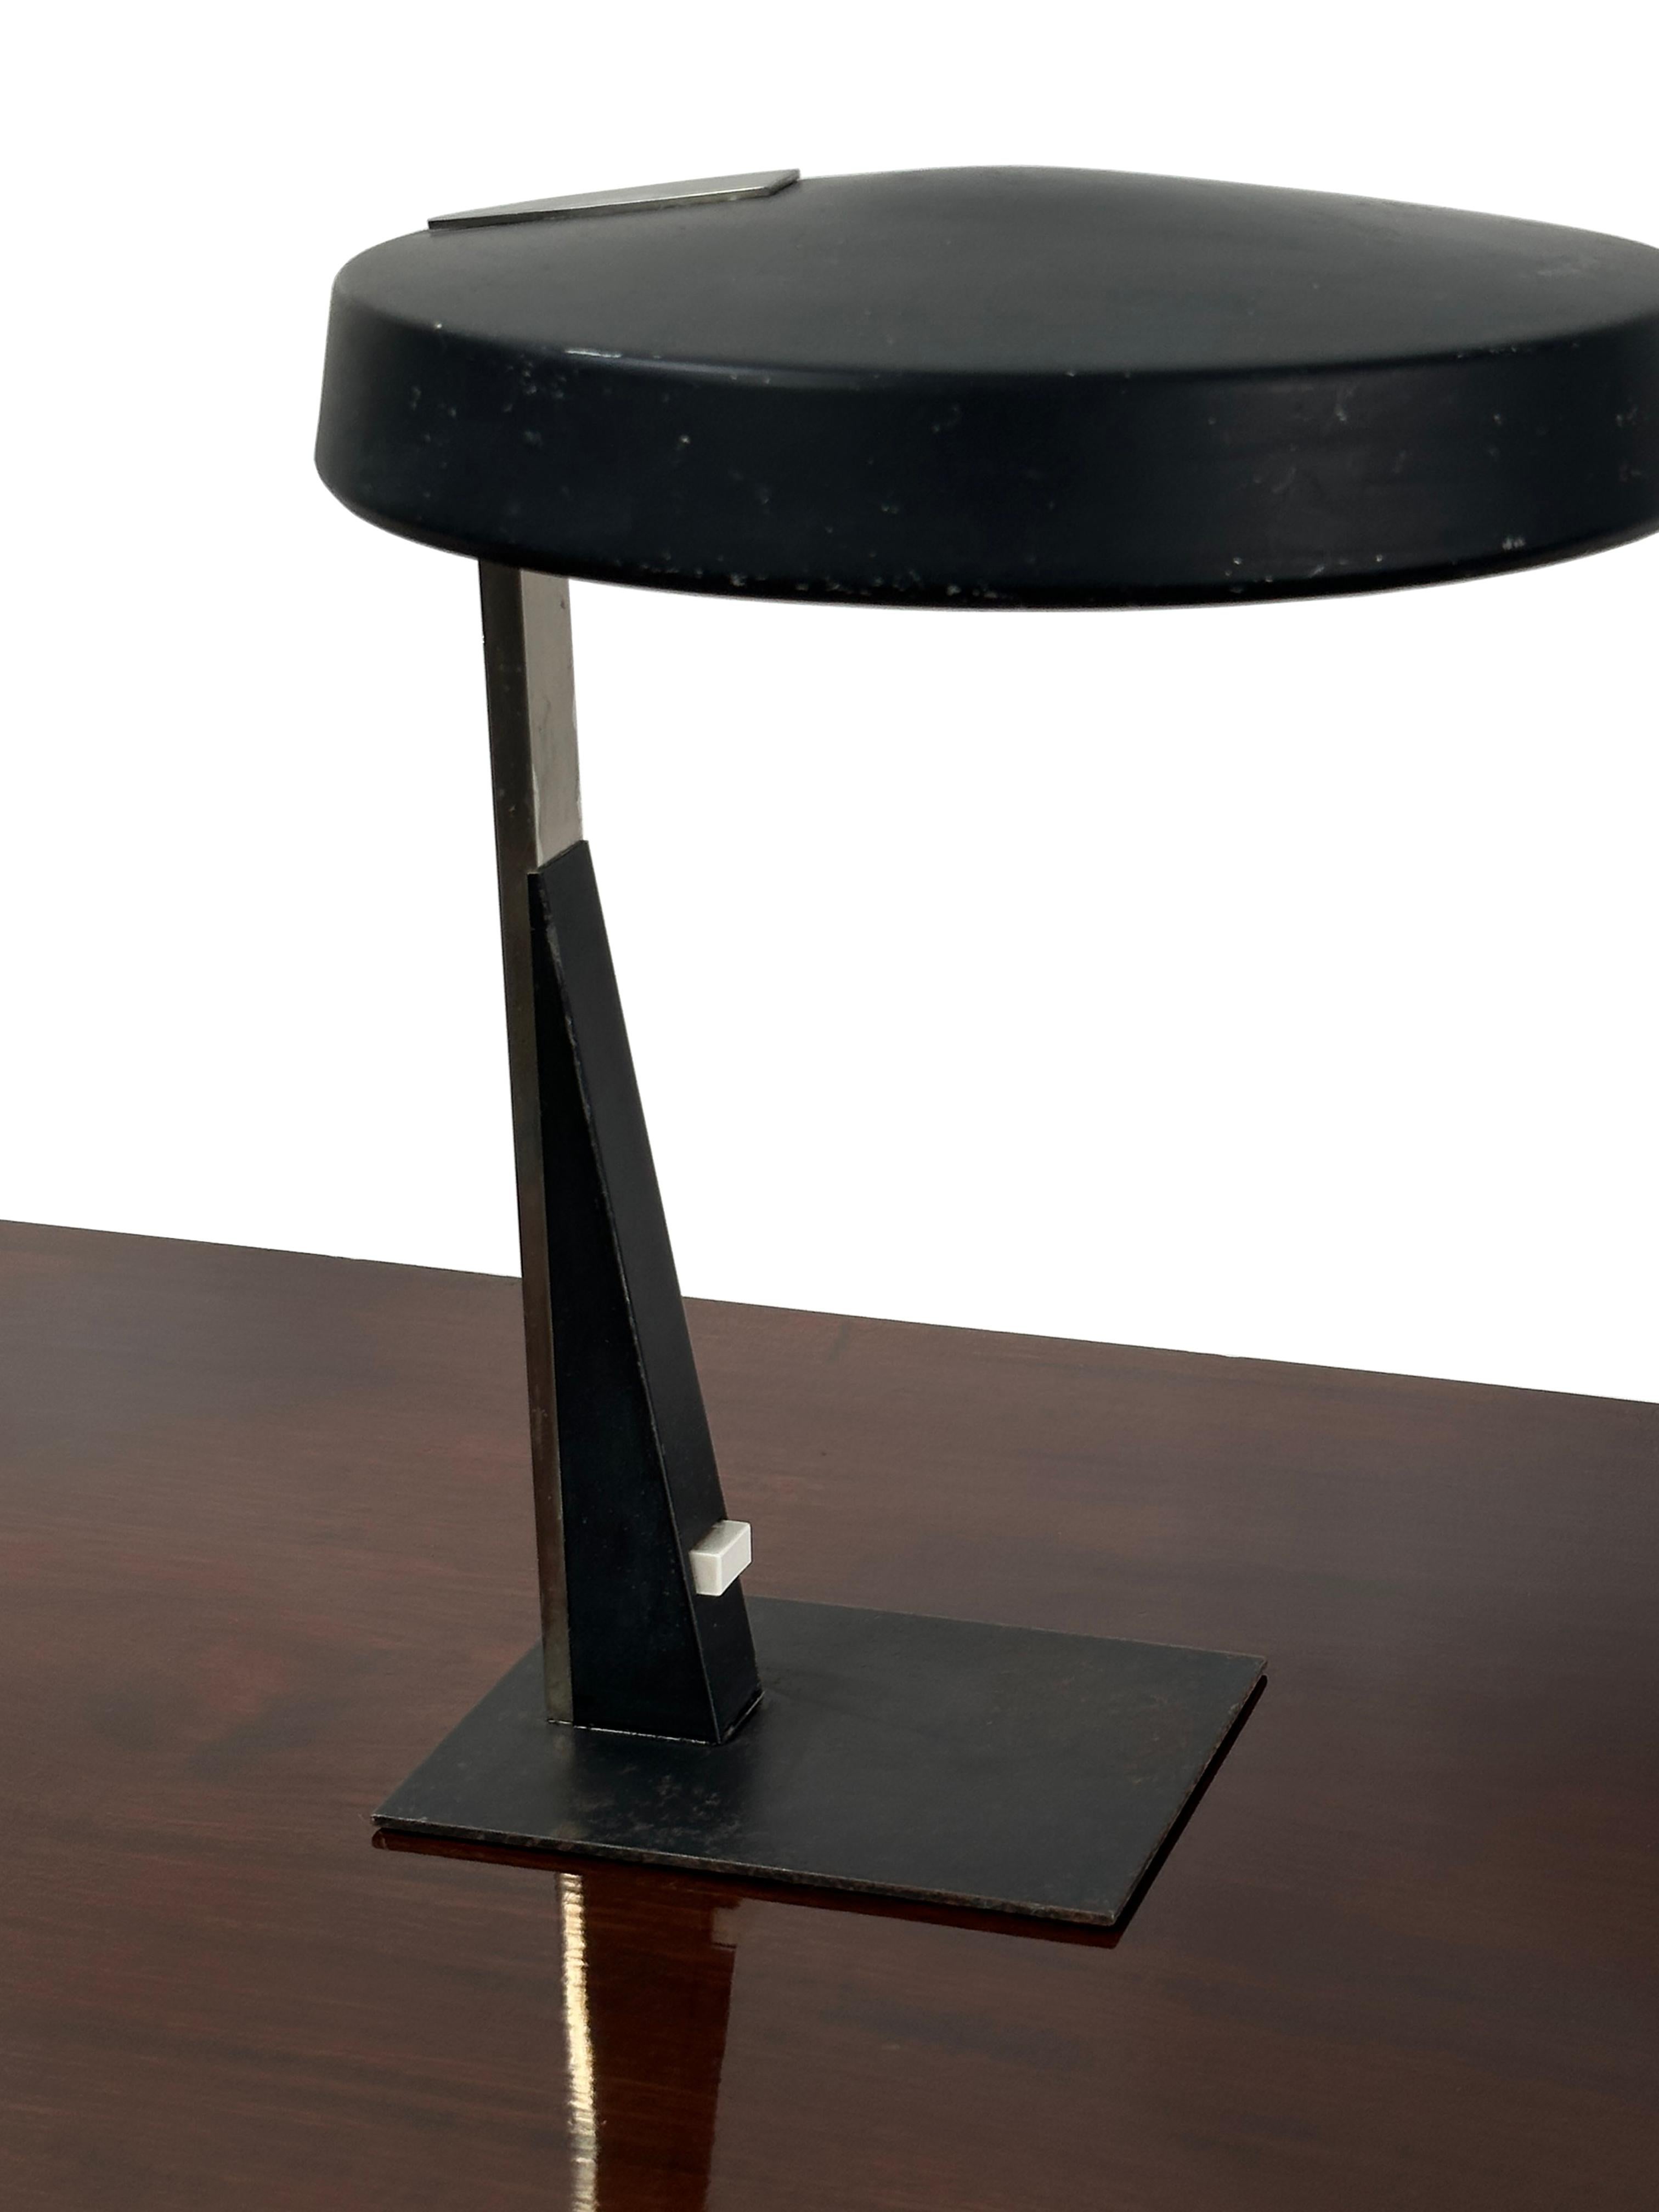 - A stylish black adjustable desk lamp by designer Louis Kalff for Philips, The Netherlands circa 1950.
- Original switch plate and adjustable light position via the shade, rewired in black braided flex and PAT tested.
- The lamp stands out with a